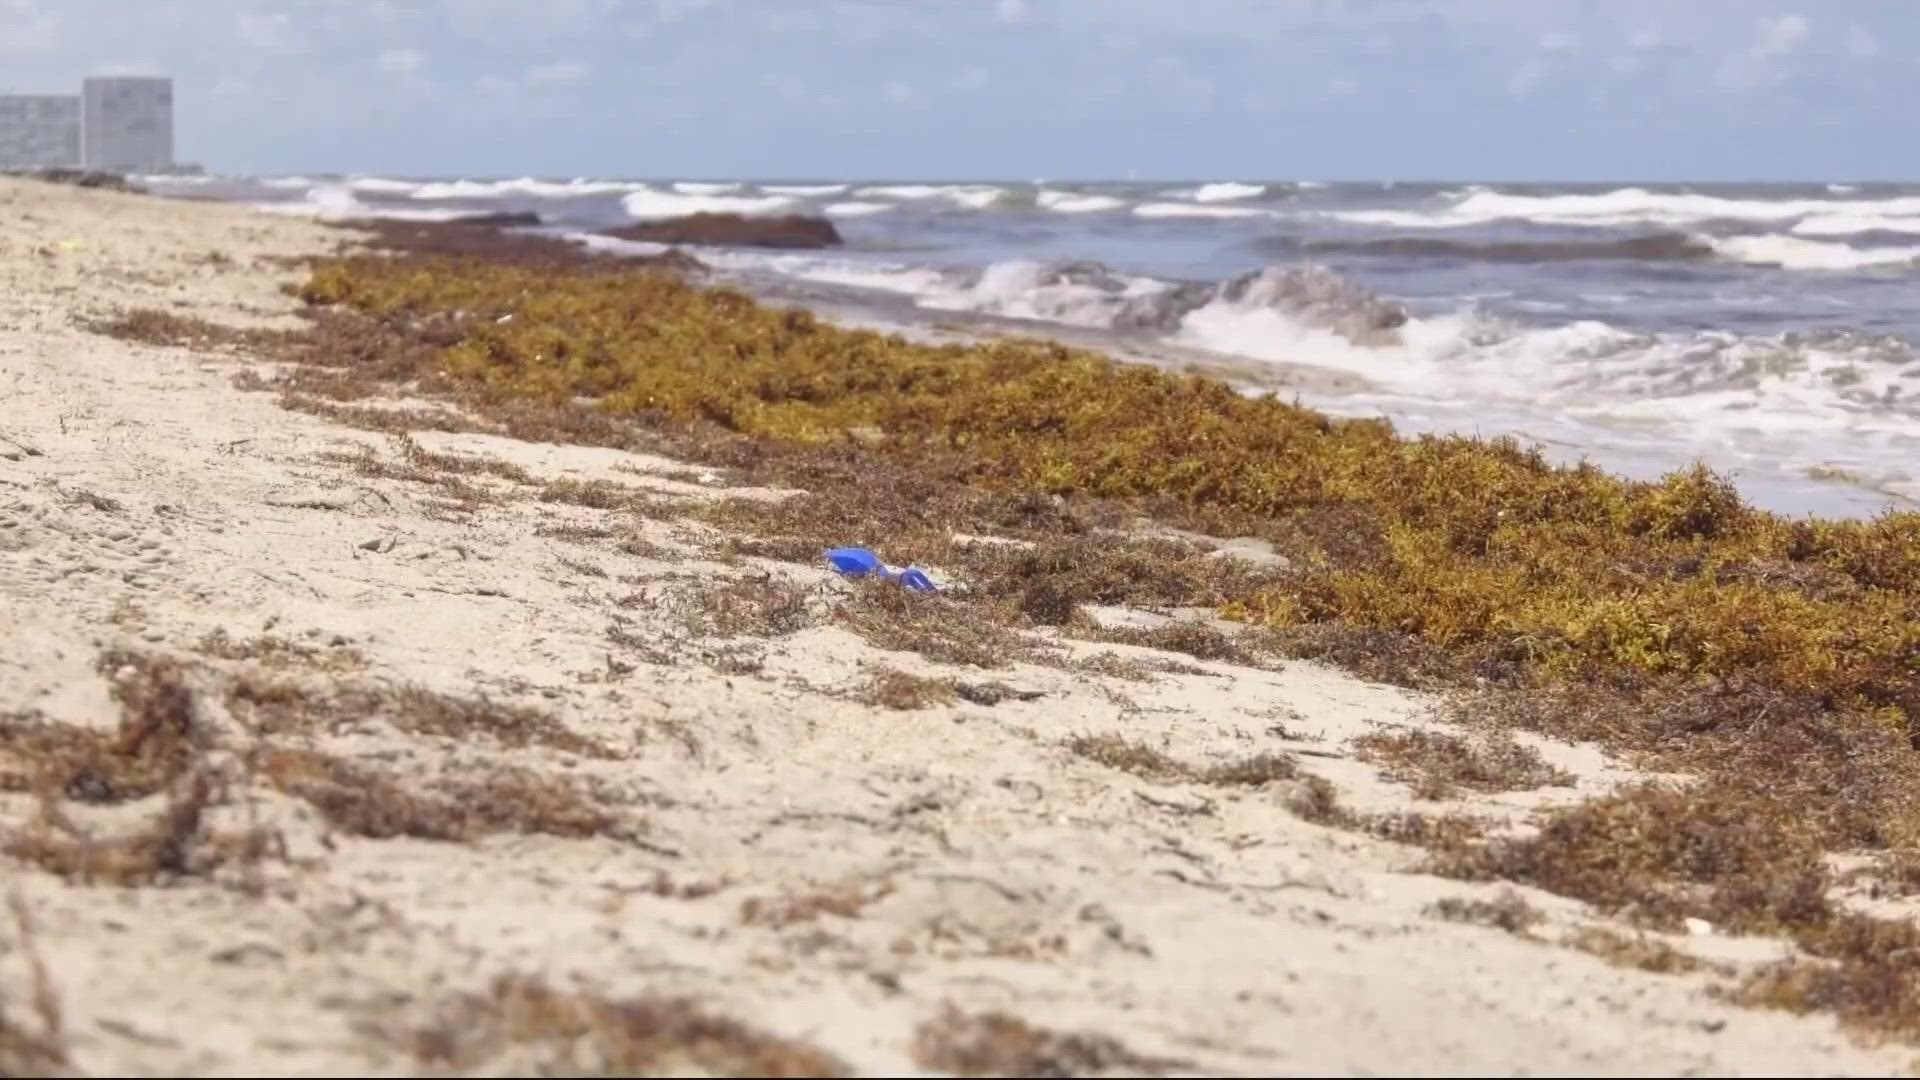 Sargassum, a seaweed that often washes up the Florida coast, is expected to be extra abundant this year.